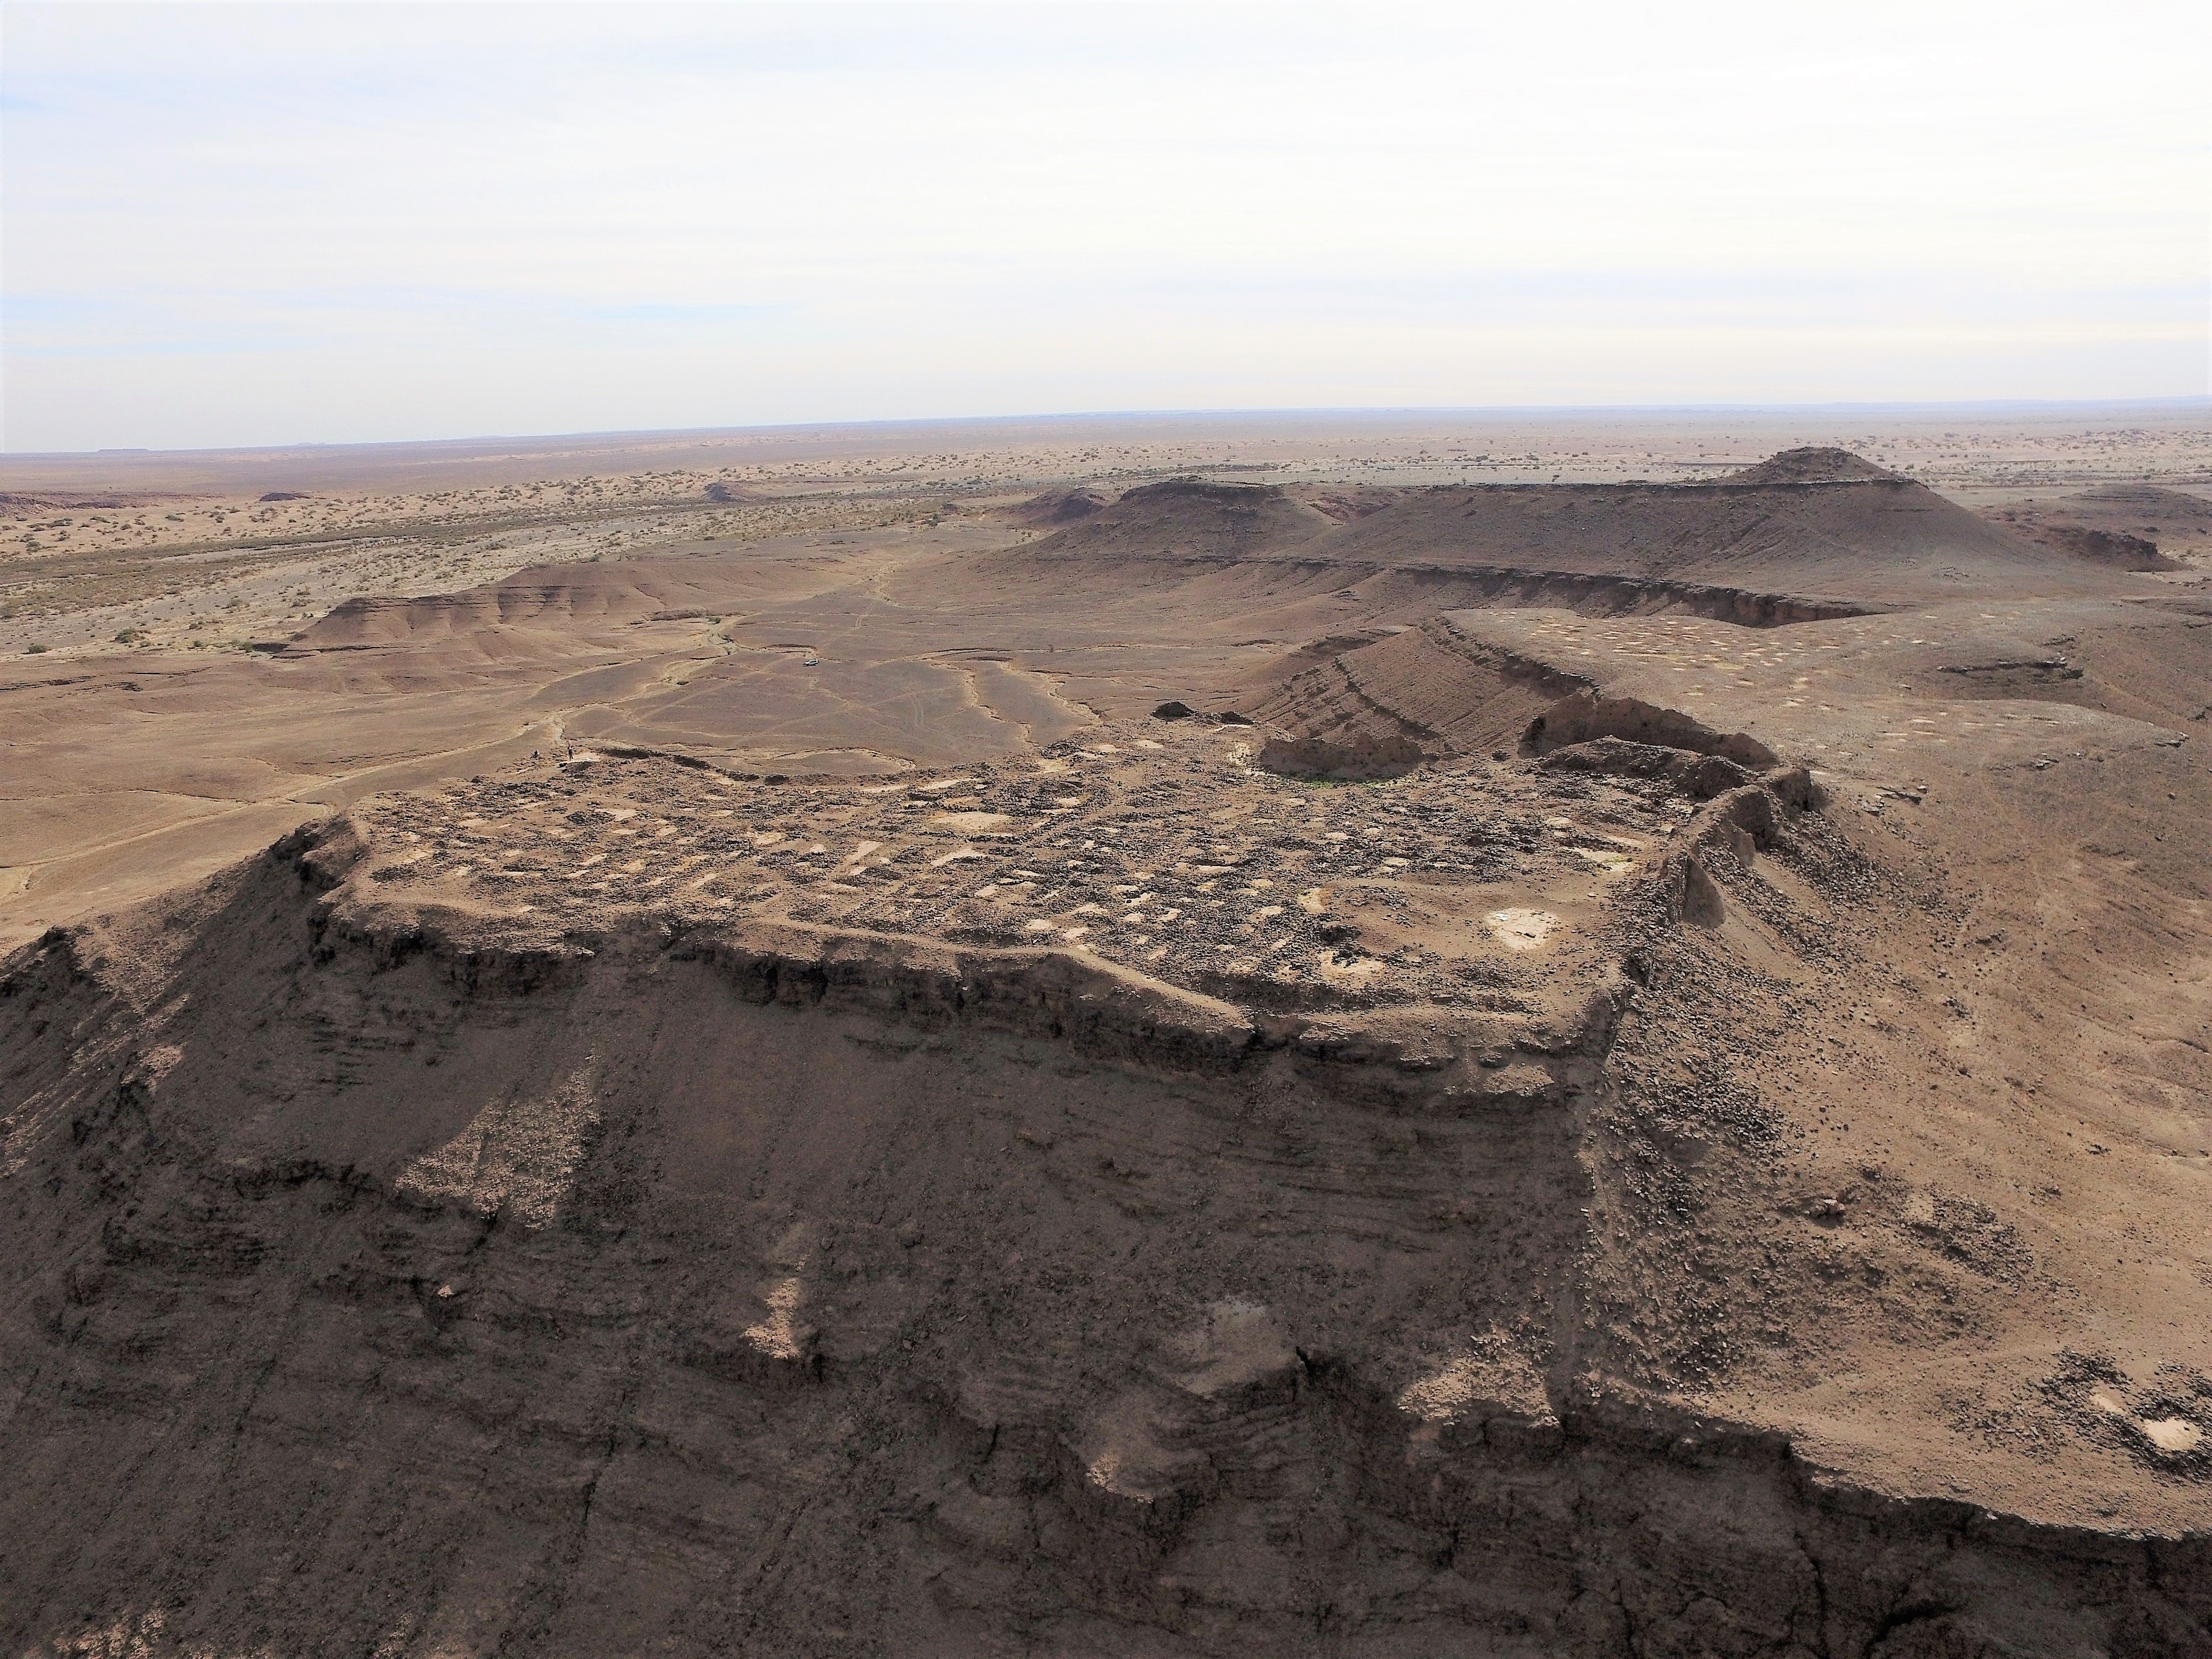 A drone image of an archaeological site in the Sahara desert.